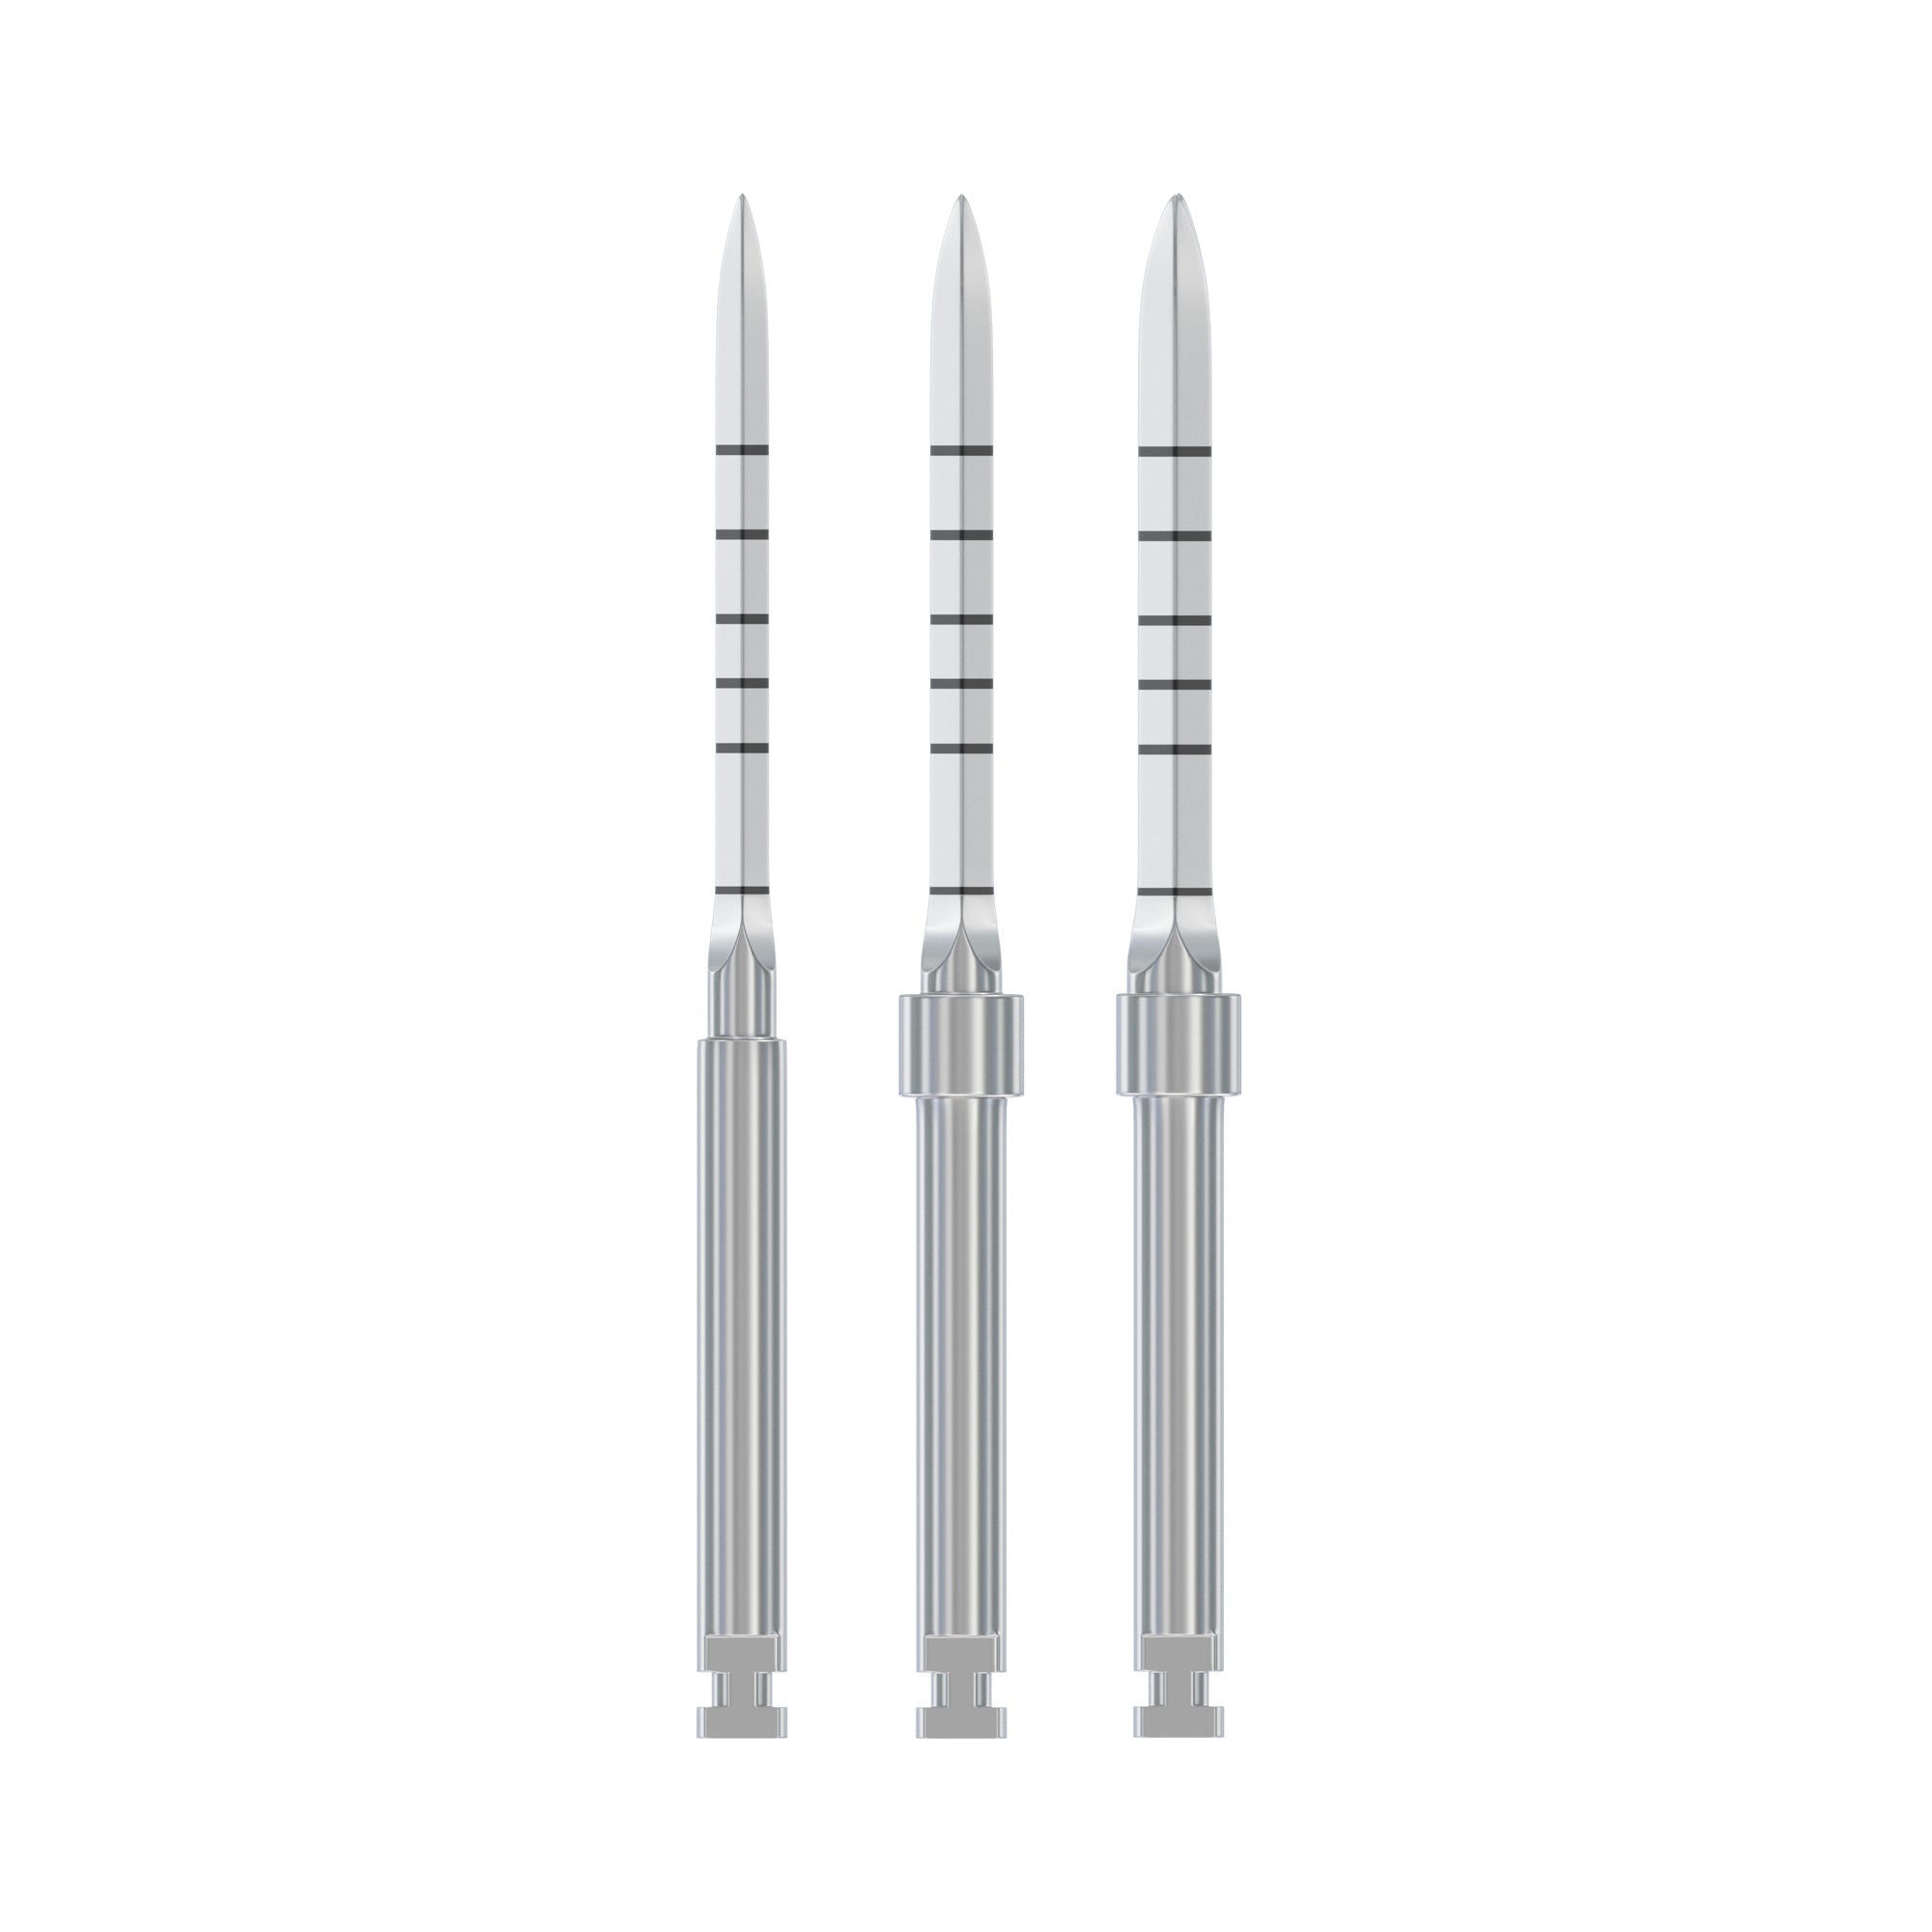 DSI Surgical Lance Initial Drills For Implant Socket Preparation